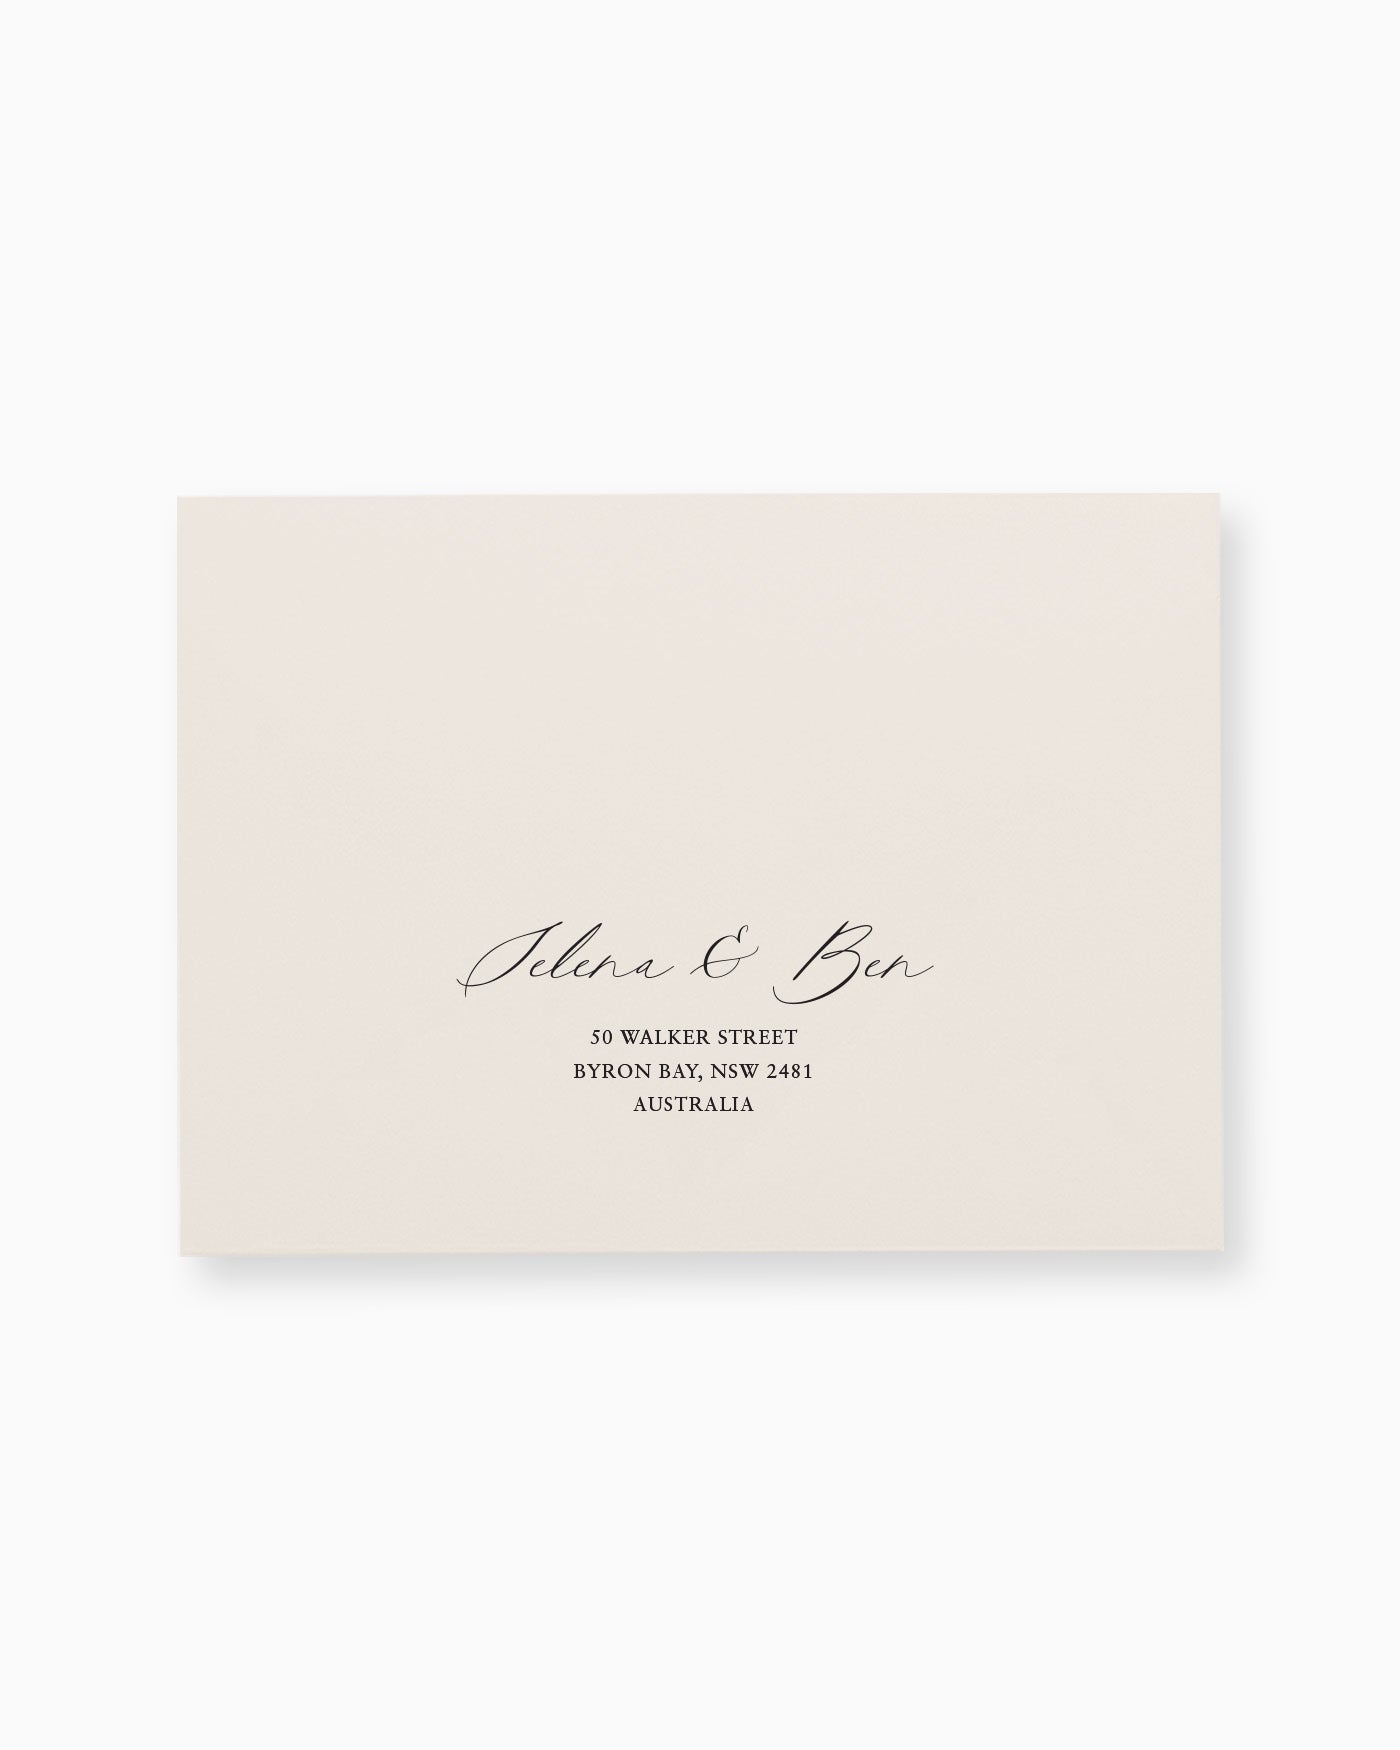 Peppermint Press Stationery Suite Amour Envelope Printing